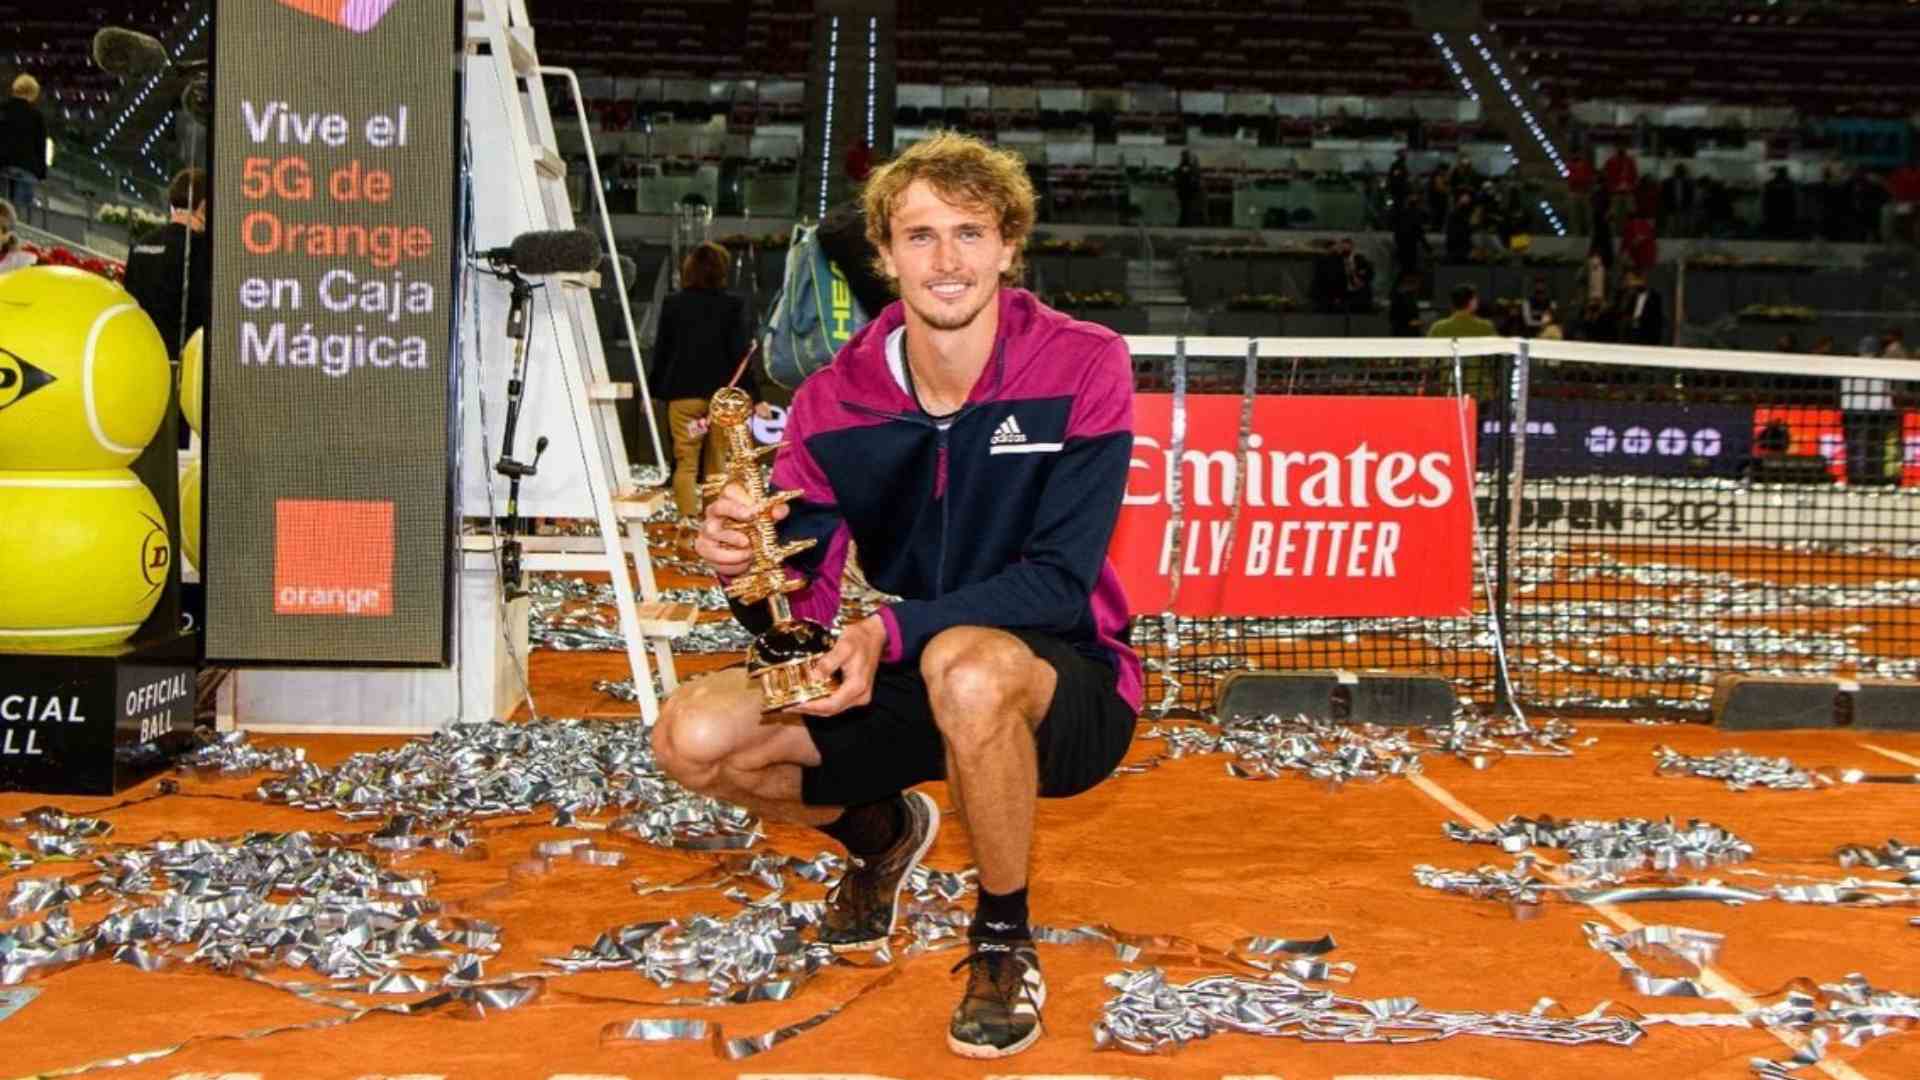 Alexander Zverev was in fine form as he won the Madrid Open for the second time.